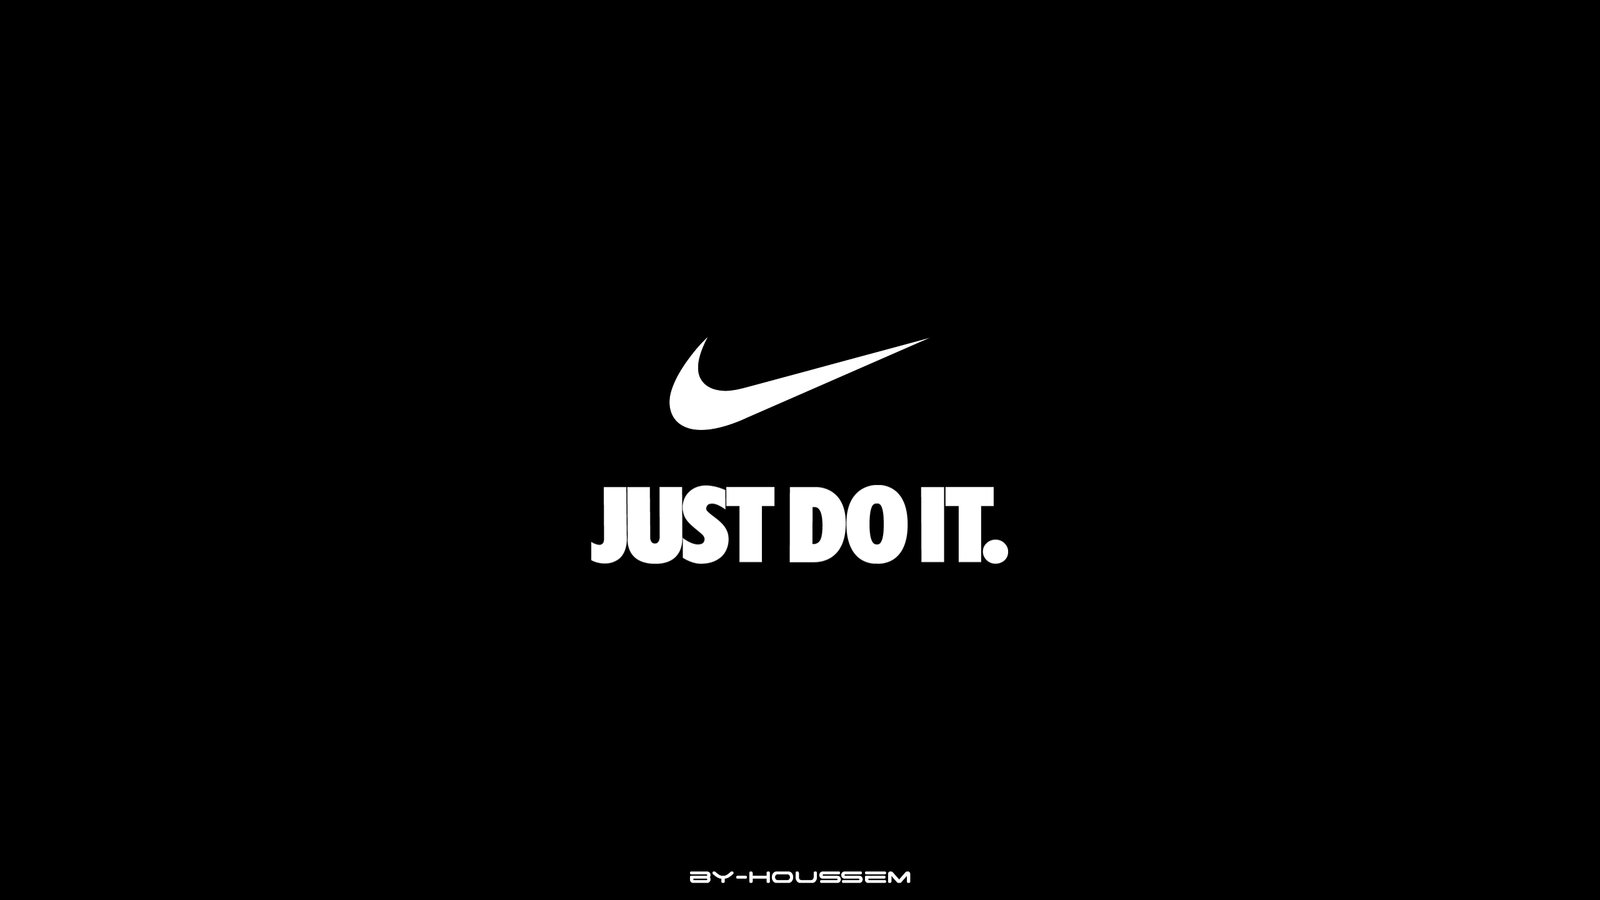 nike just do it wallpaper hd 2014 BY HOUSSEM by houssem9 on